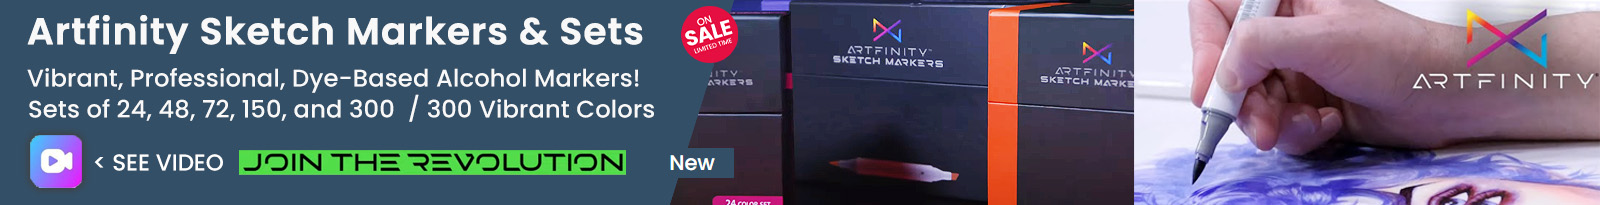 Artfinity Sketch Markers, The Best Sketch Markers for Artists